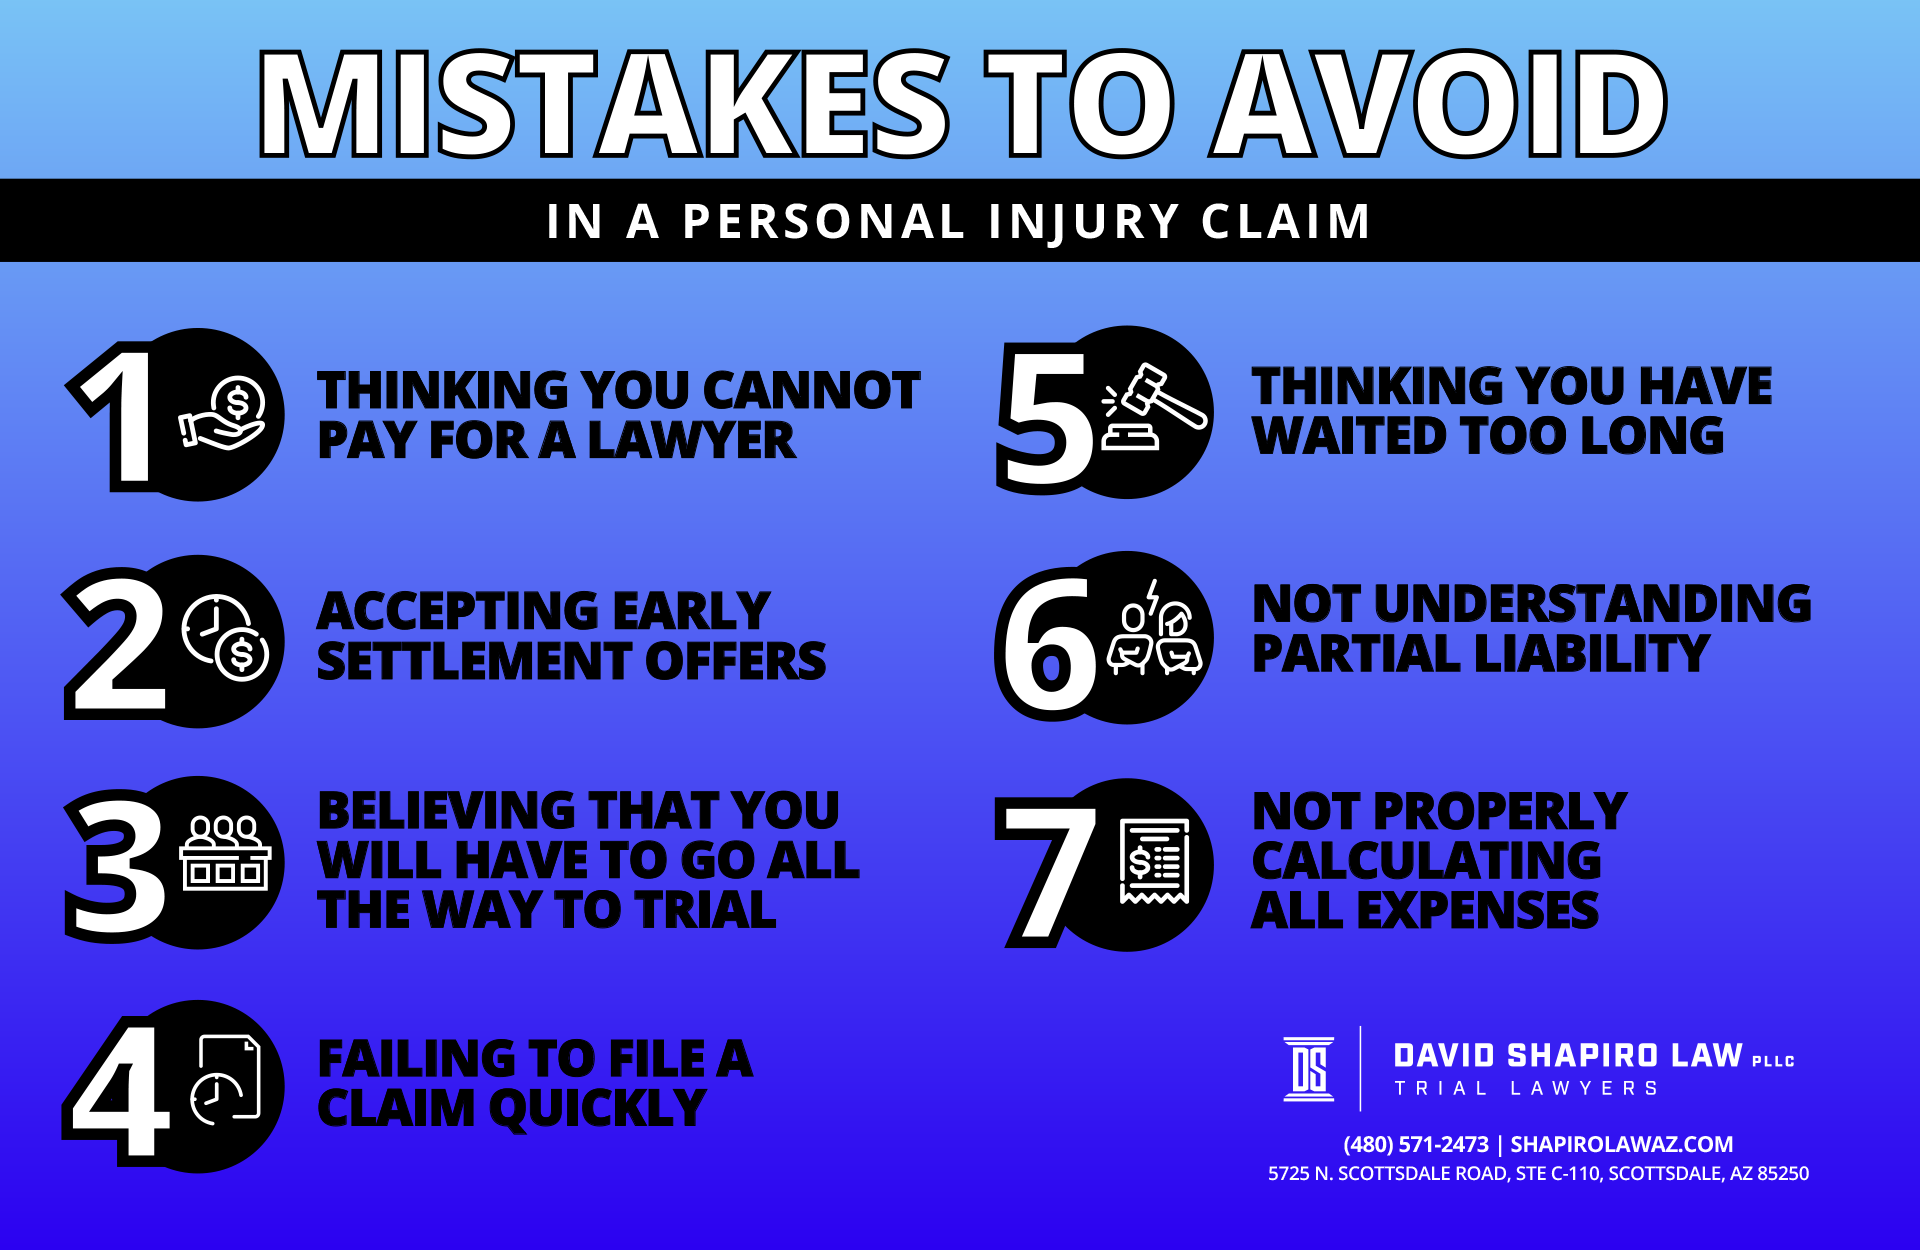 Mistakes-to-avoid-in-personal-injury-claim-infographic